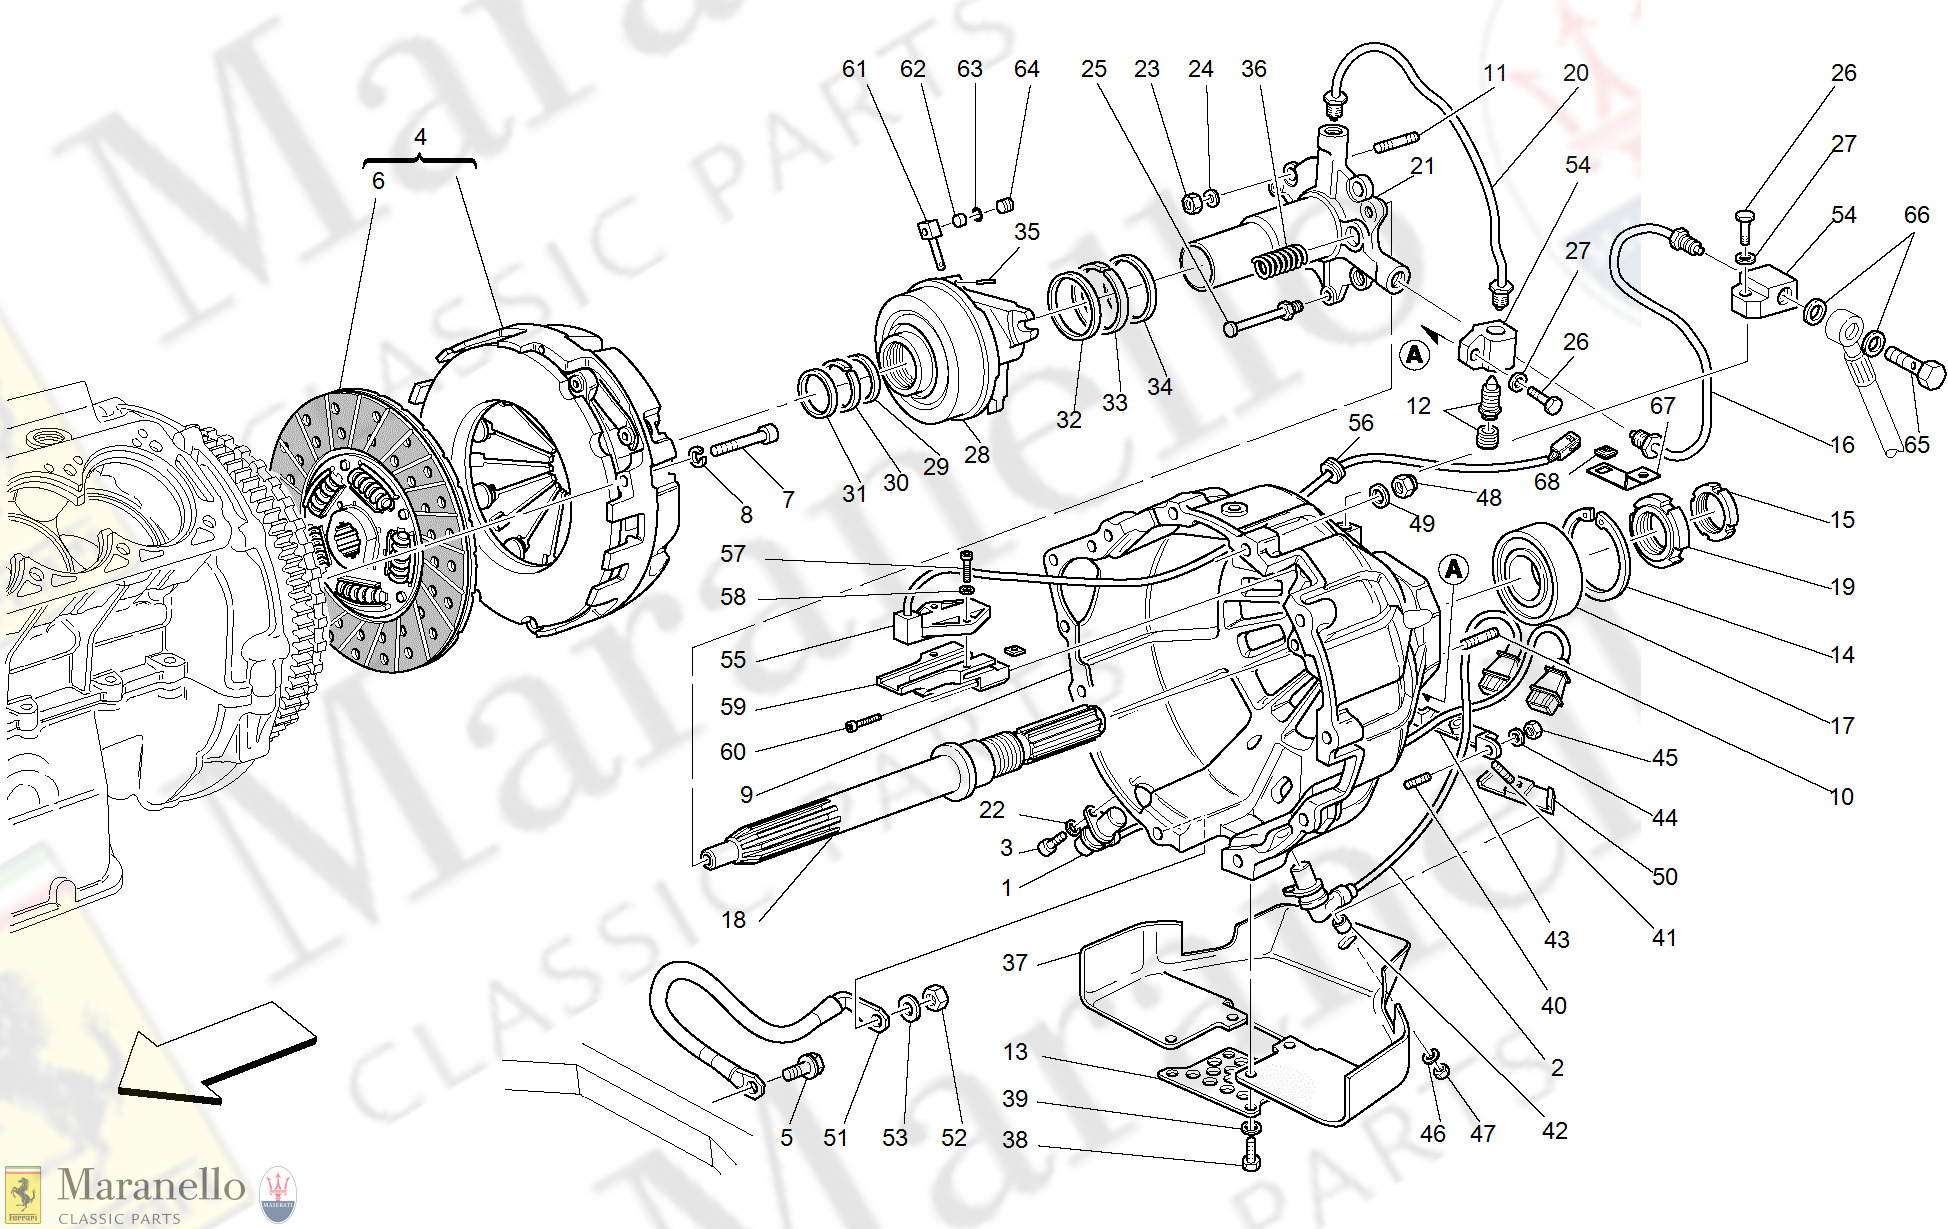 029 - Clutch And Controls -Valid For F1-